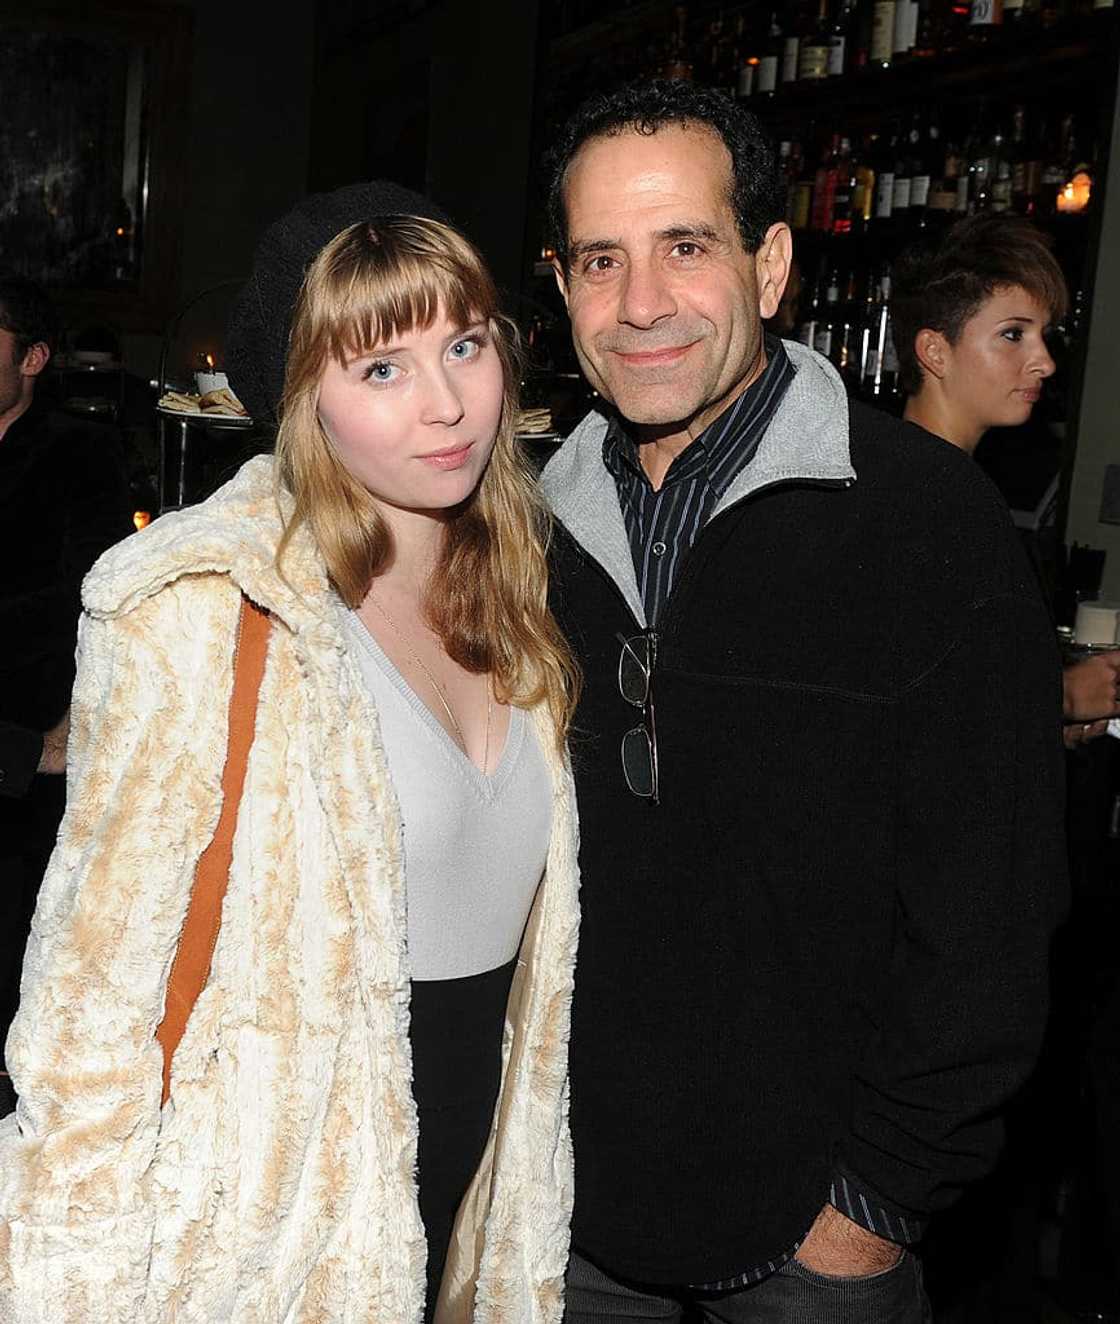 Does Tony Shalhoub have a daughter?